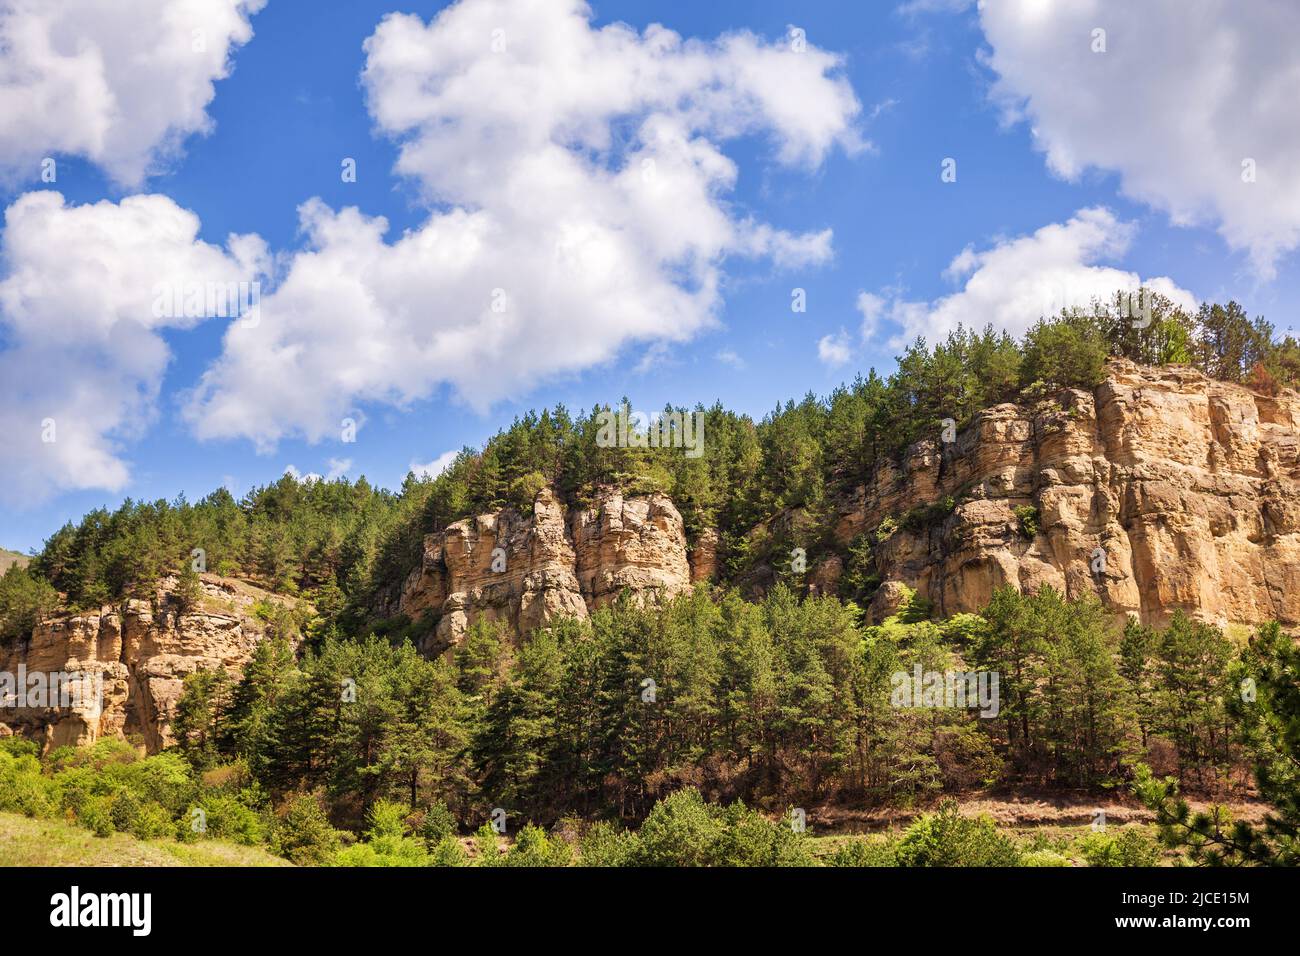 Borgustan Ridge is a mountain range of the Greater Caucasus. Sheer cliffs with pine forest Stock Photo